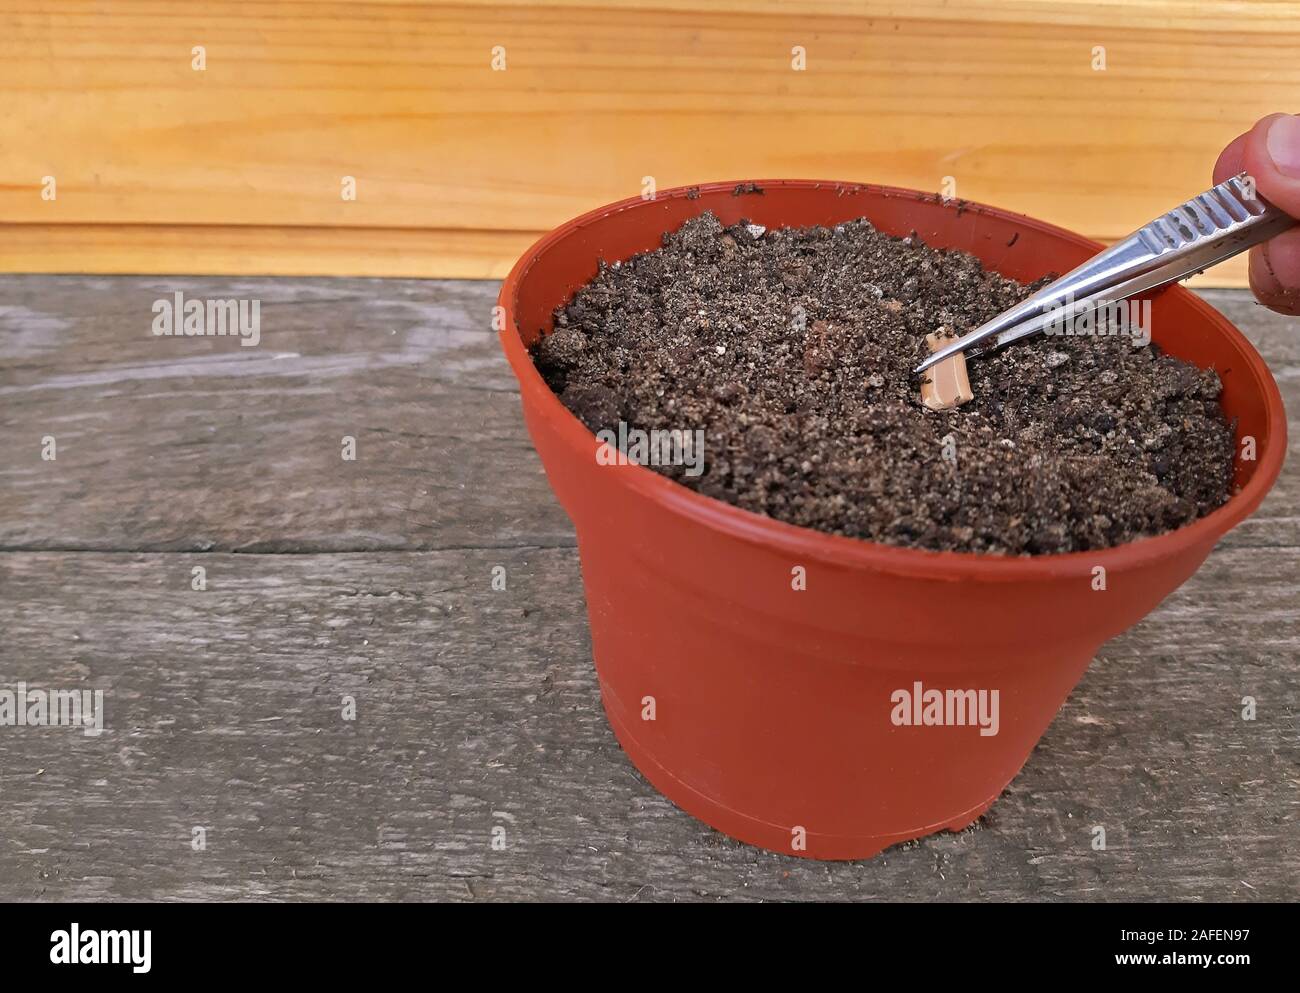 Sowing a seed in potting soil with Copy space Stock Photo